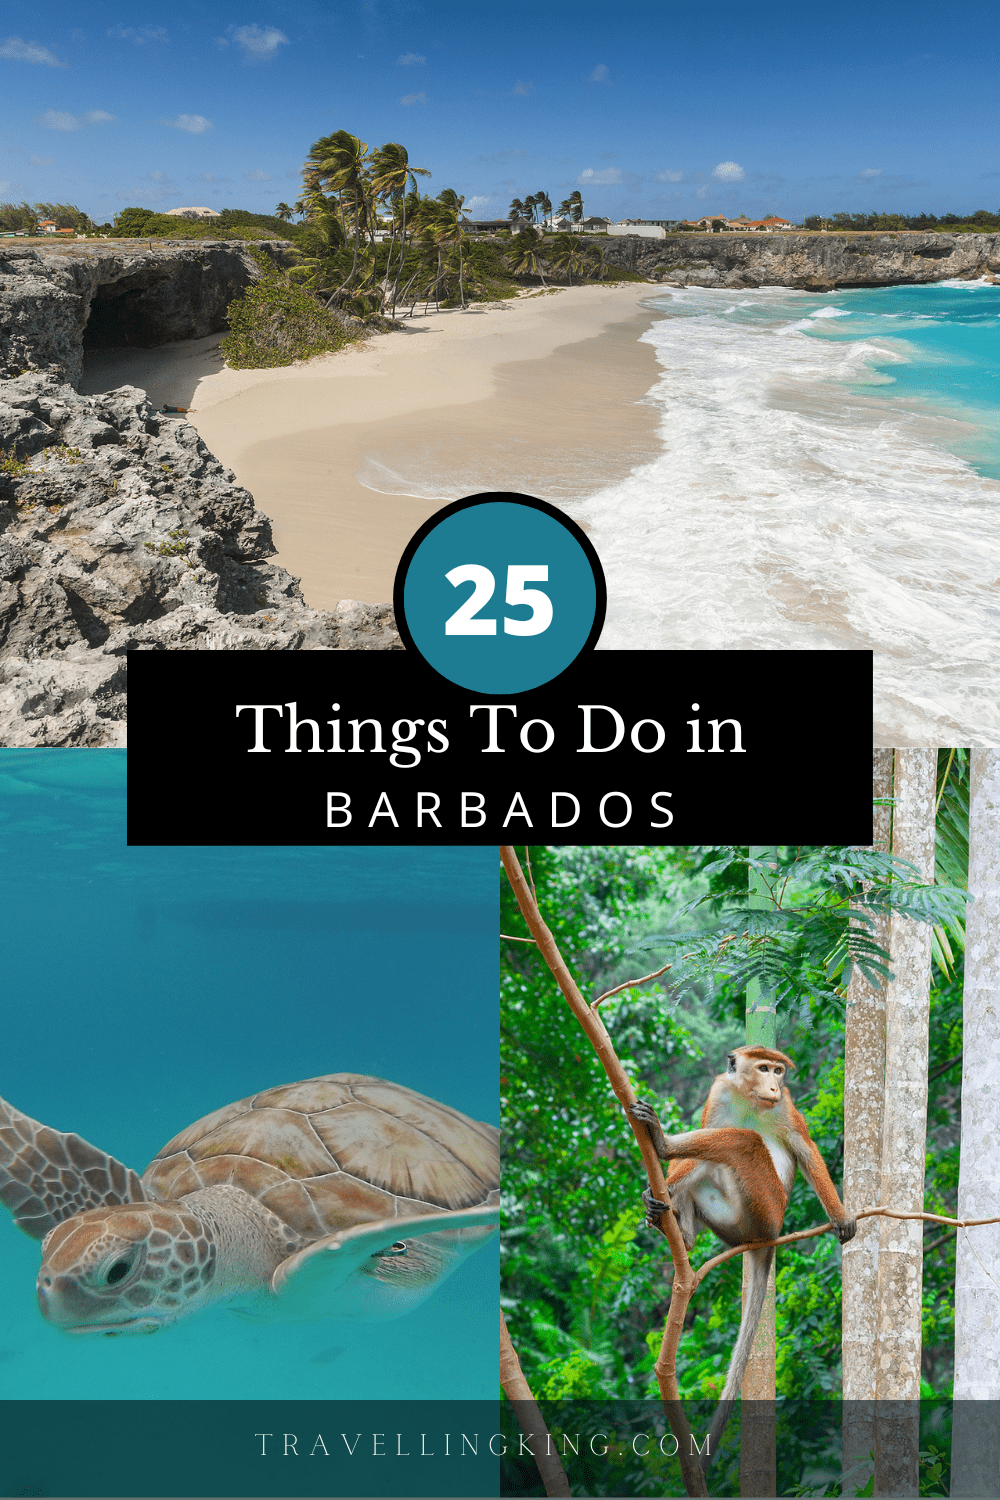 25 Things to do in Barbados